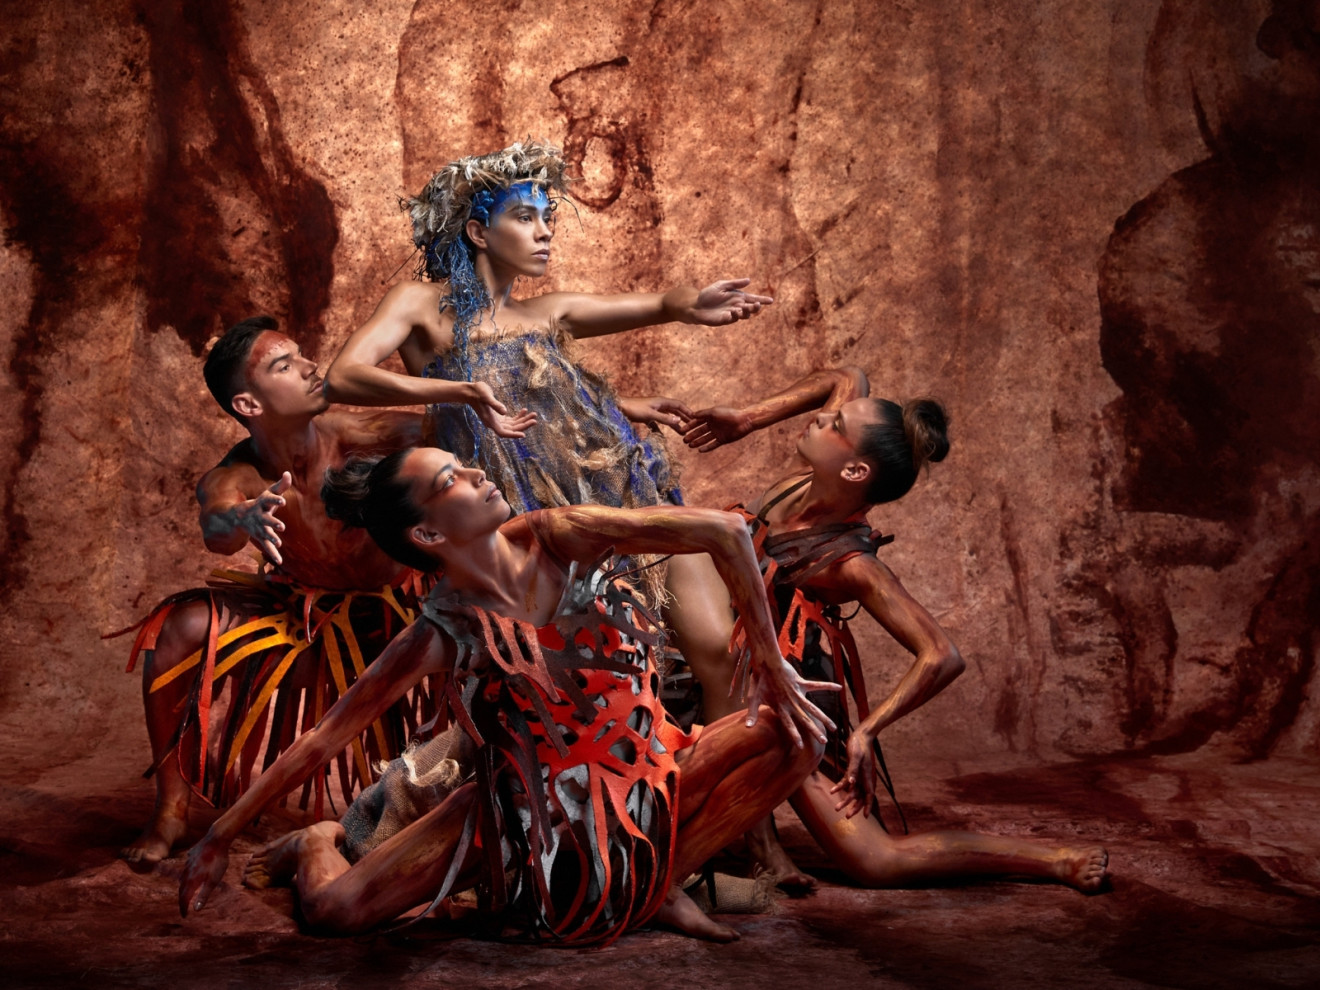 SandSong presented by Bangarra Dance Theatre